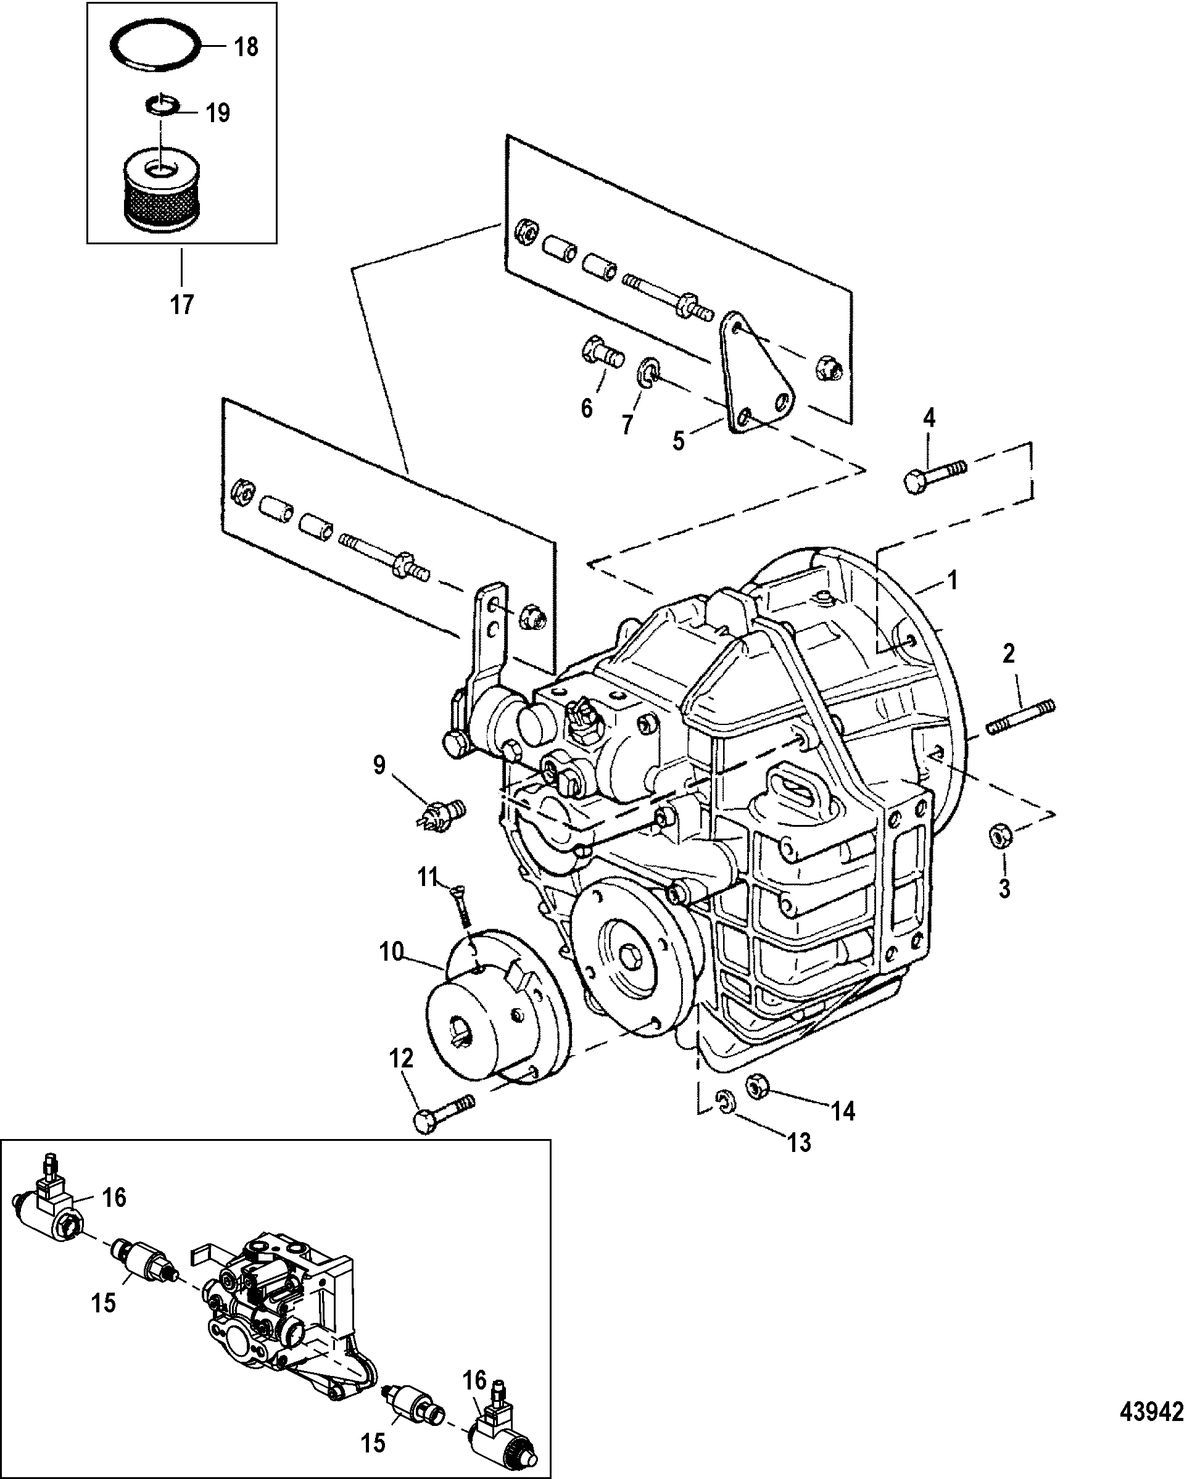 MERCRUISER CUMMINS/MERCRUISER DIESEL QSD-4.2L Transmission and Related Parts(INBOARD)